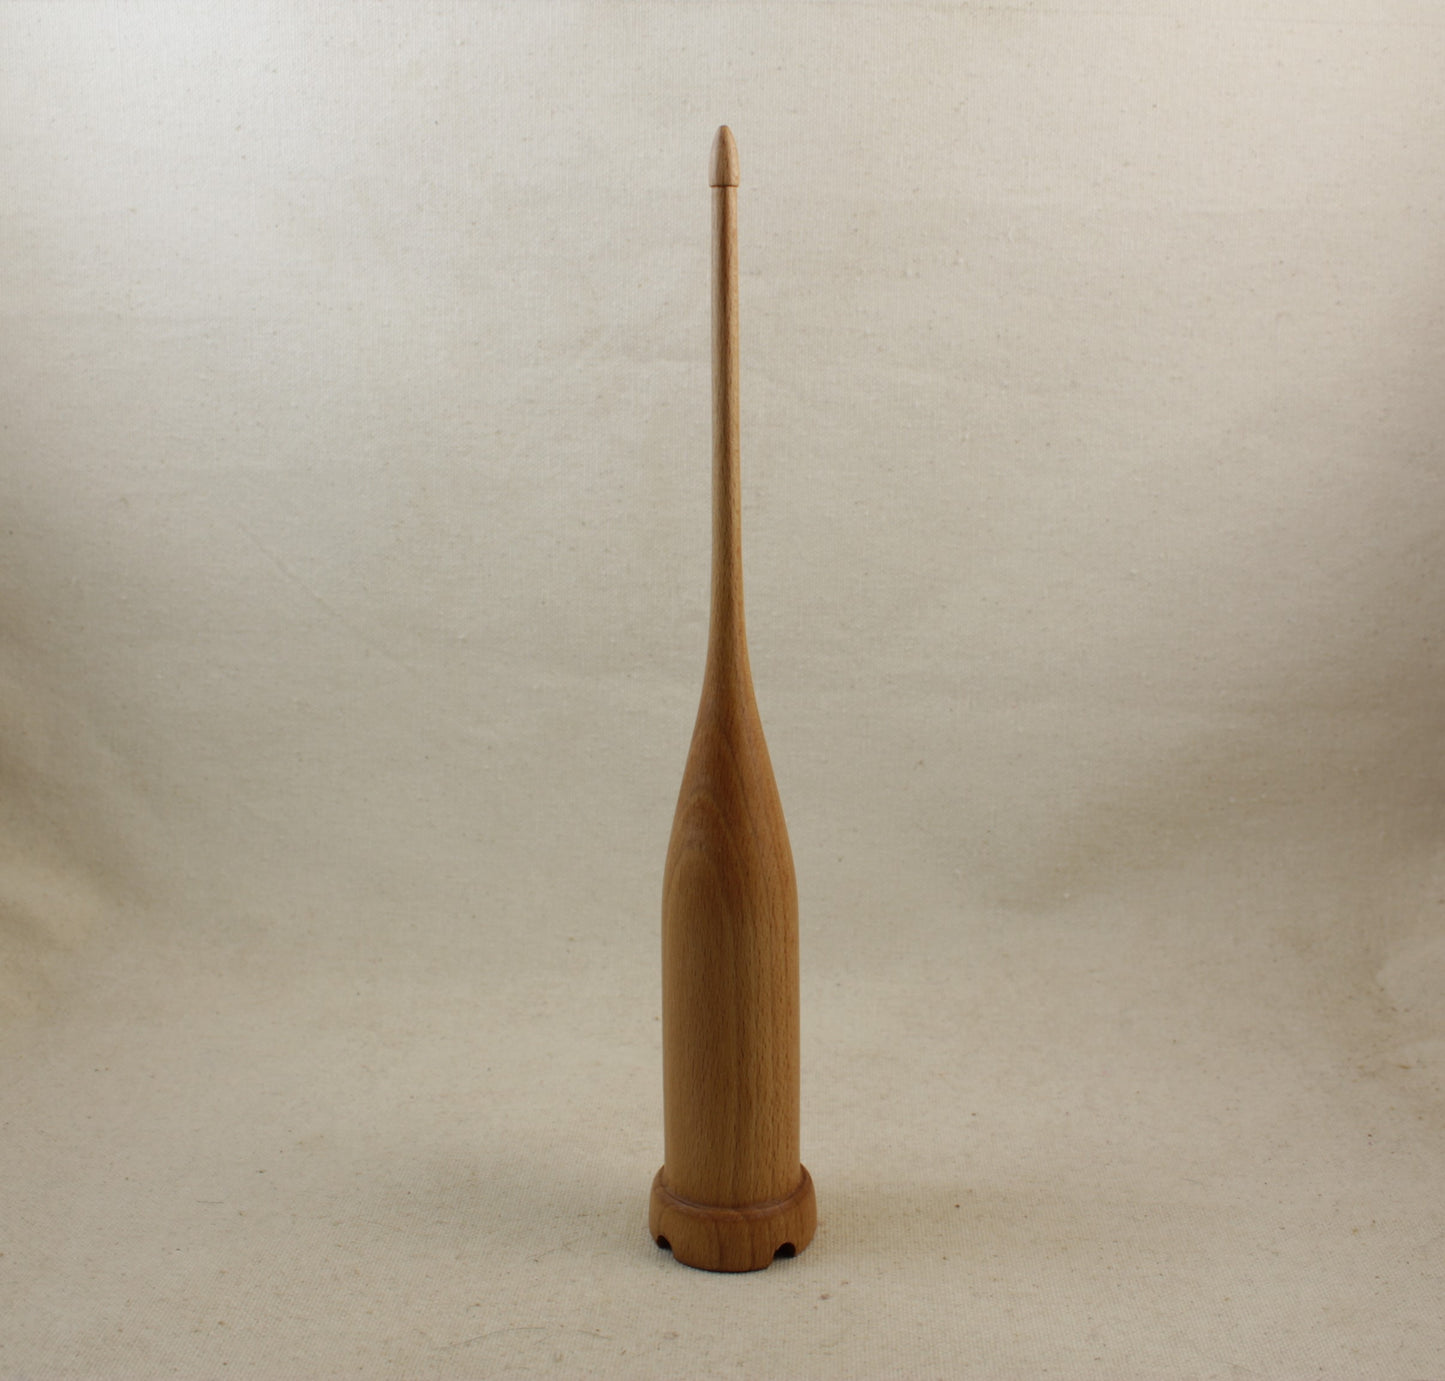 Beech Scottish style drop spindle 9 inch